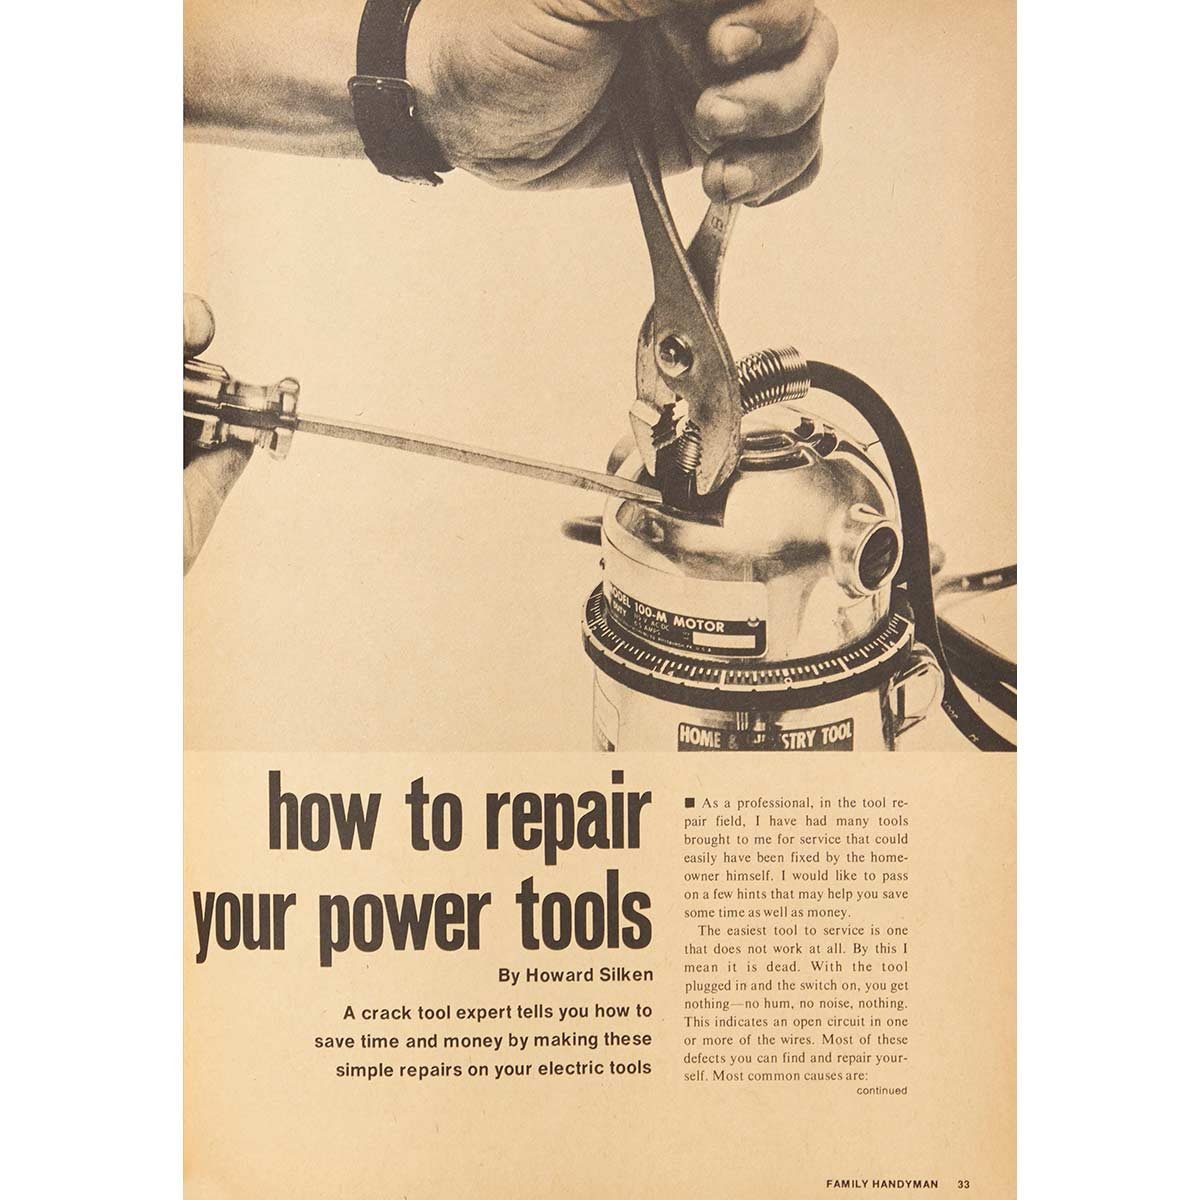 Vintage Family Handyman Feature from 1970: How to Repair Your Power Tools